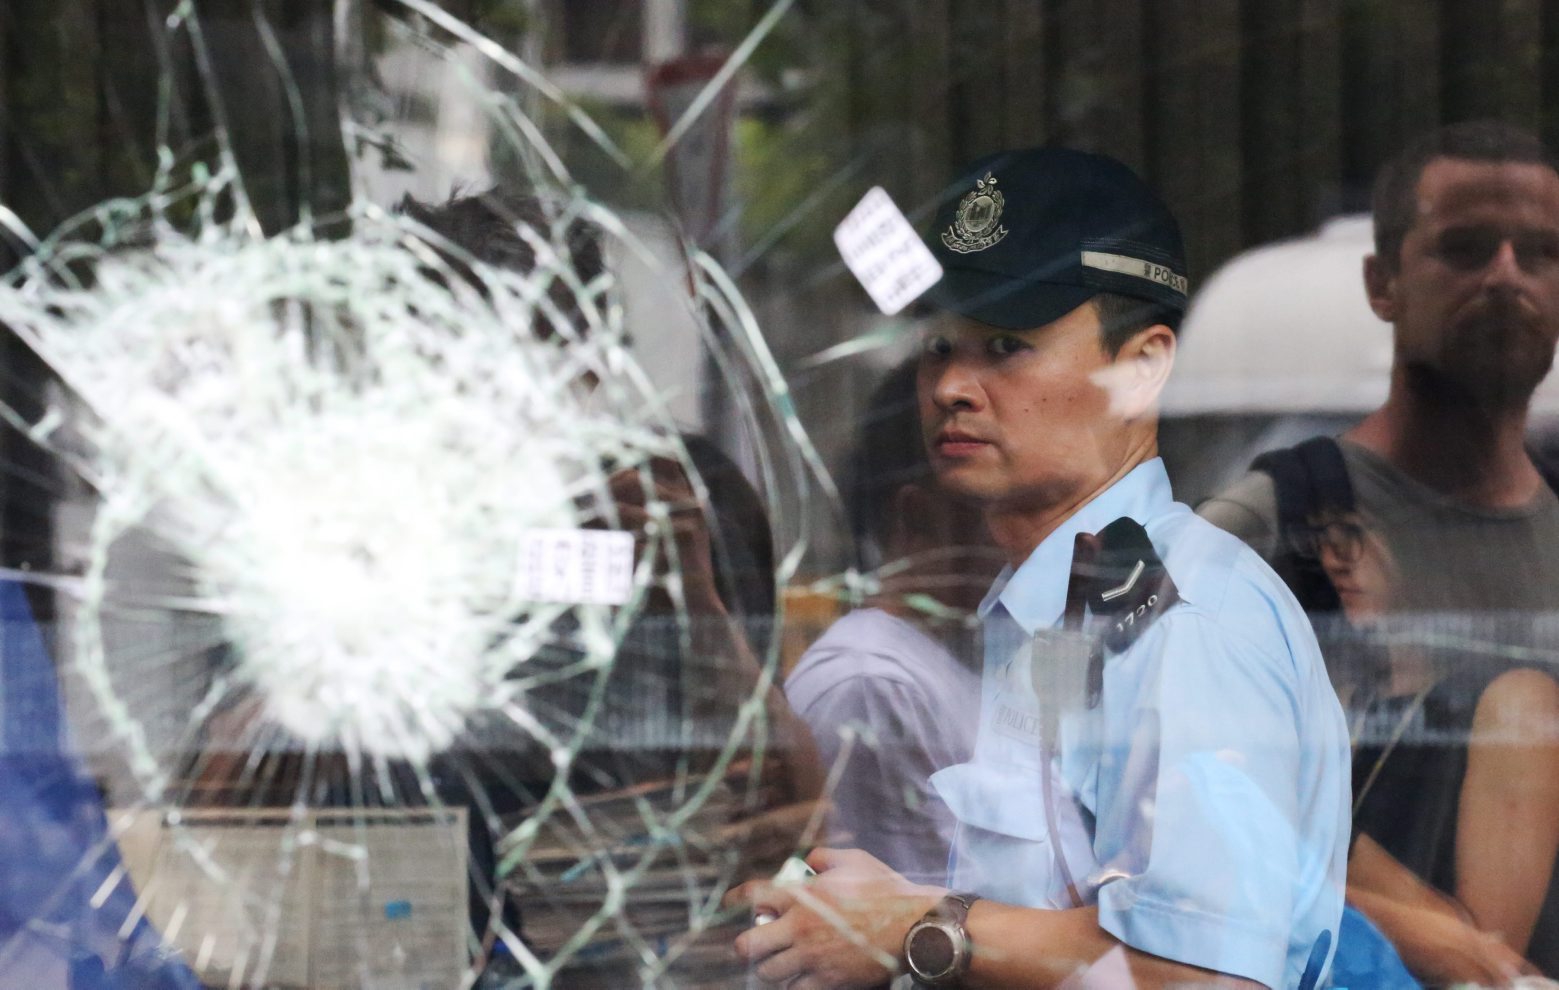 epa07688545 Police officers are seen behind broken glass panels at the Legislative Council Building after protesters stormed the building in Hong Kong, China, 02 July 2019. According to reports, police fired tear gas and evicted protesters who broke into and occupied the Legislative Council Building for hours on 01 July 2019, the 22nd anniversary of the 1997 handover of Hong Kong from Britain to China.  EPA/RITCHIE B. TONGO CHINA HONG KONG EXTRADIITON BILL PROTEST